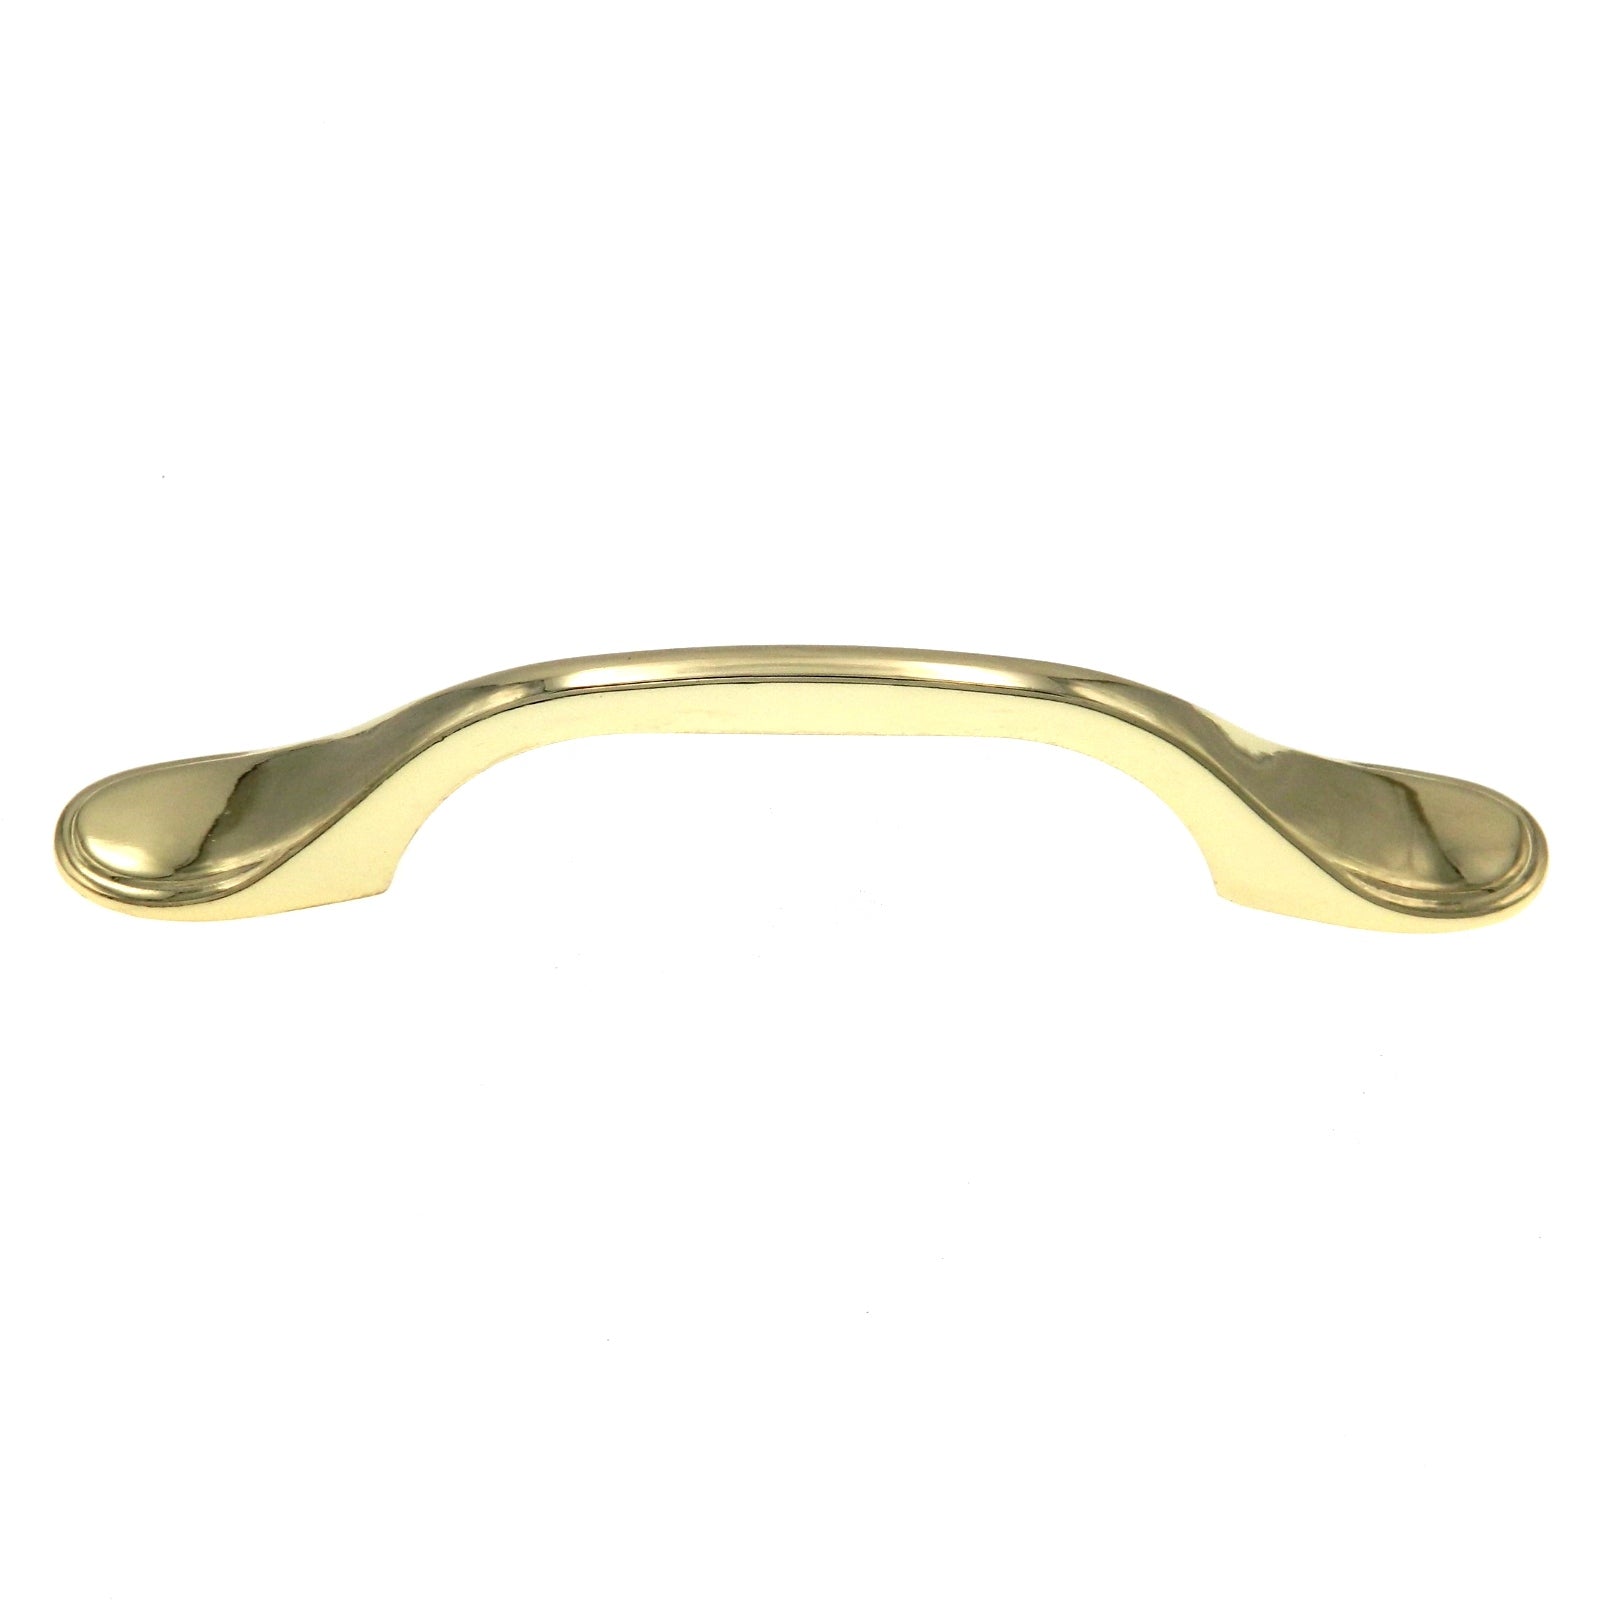 Warwick Traditional Polished Brass 3"cc Footed Cabinet Handle Pull DH1010PB